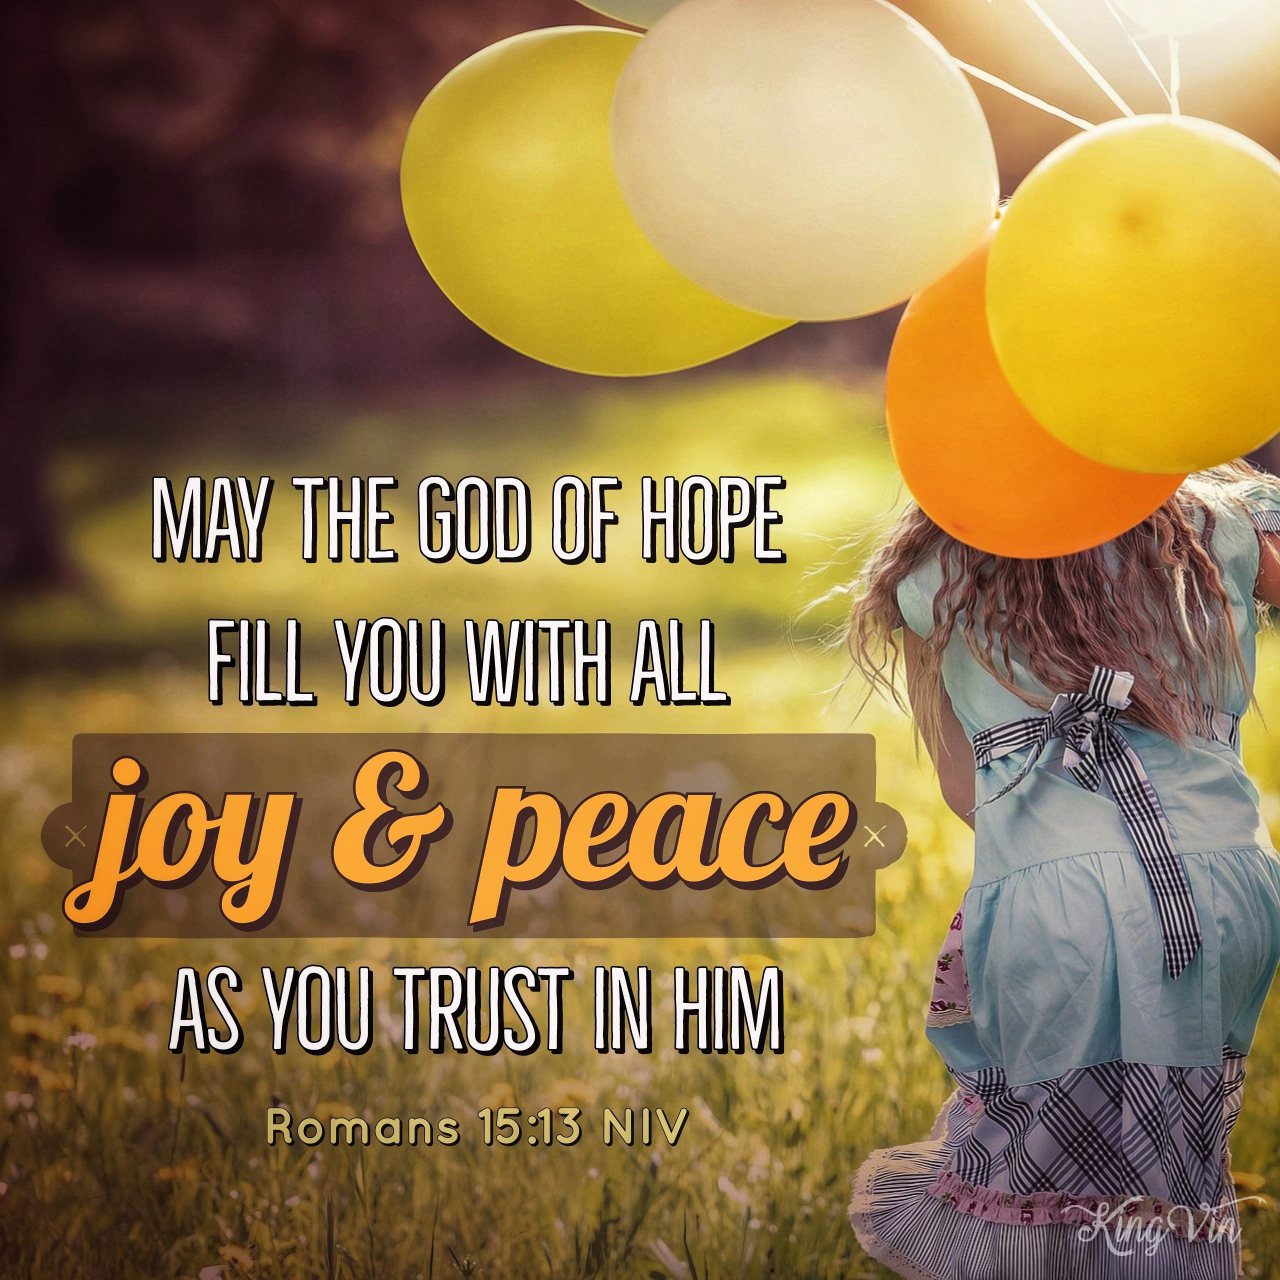 May the God of hope fill you with all joy and peace as you trust in him, so that you may overflow with hope by the power of the Holy Spirit. Romans 15:13 NIV